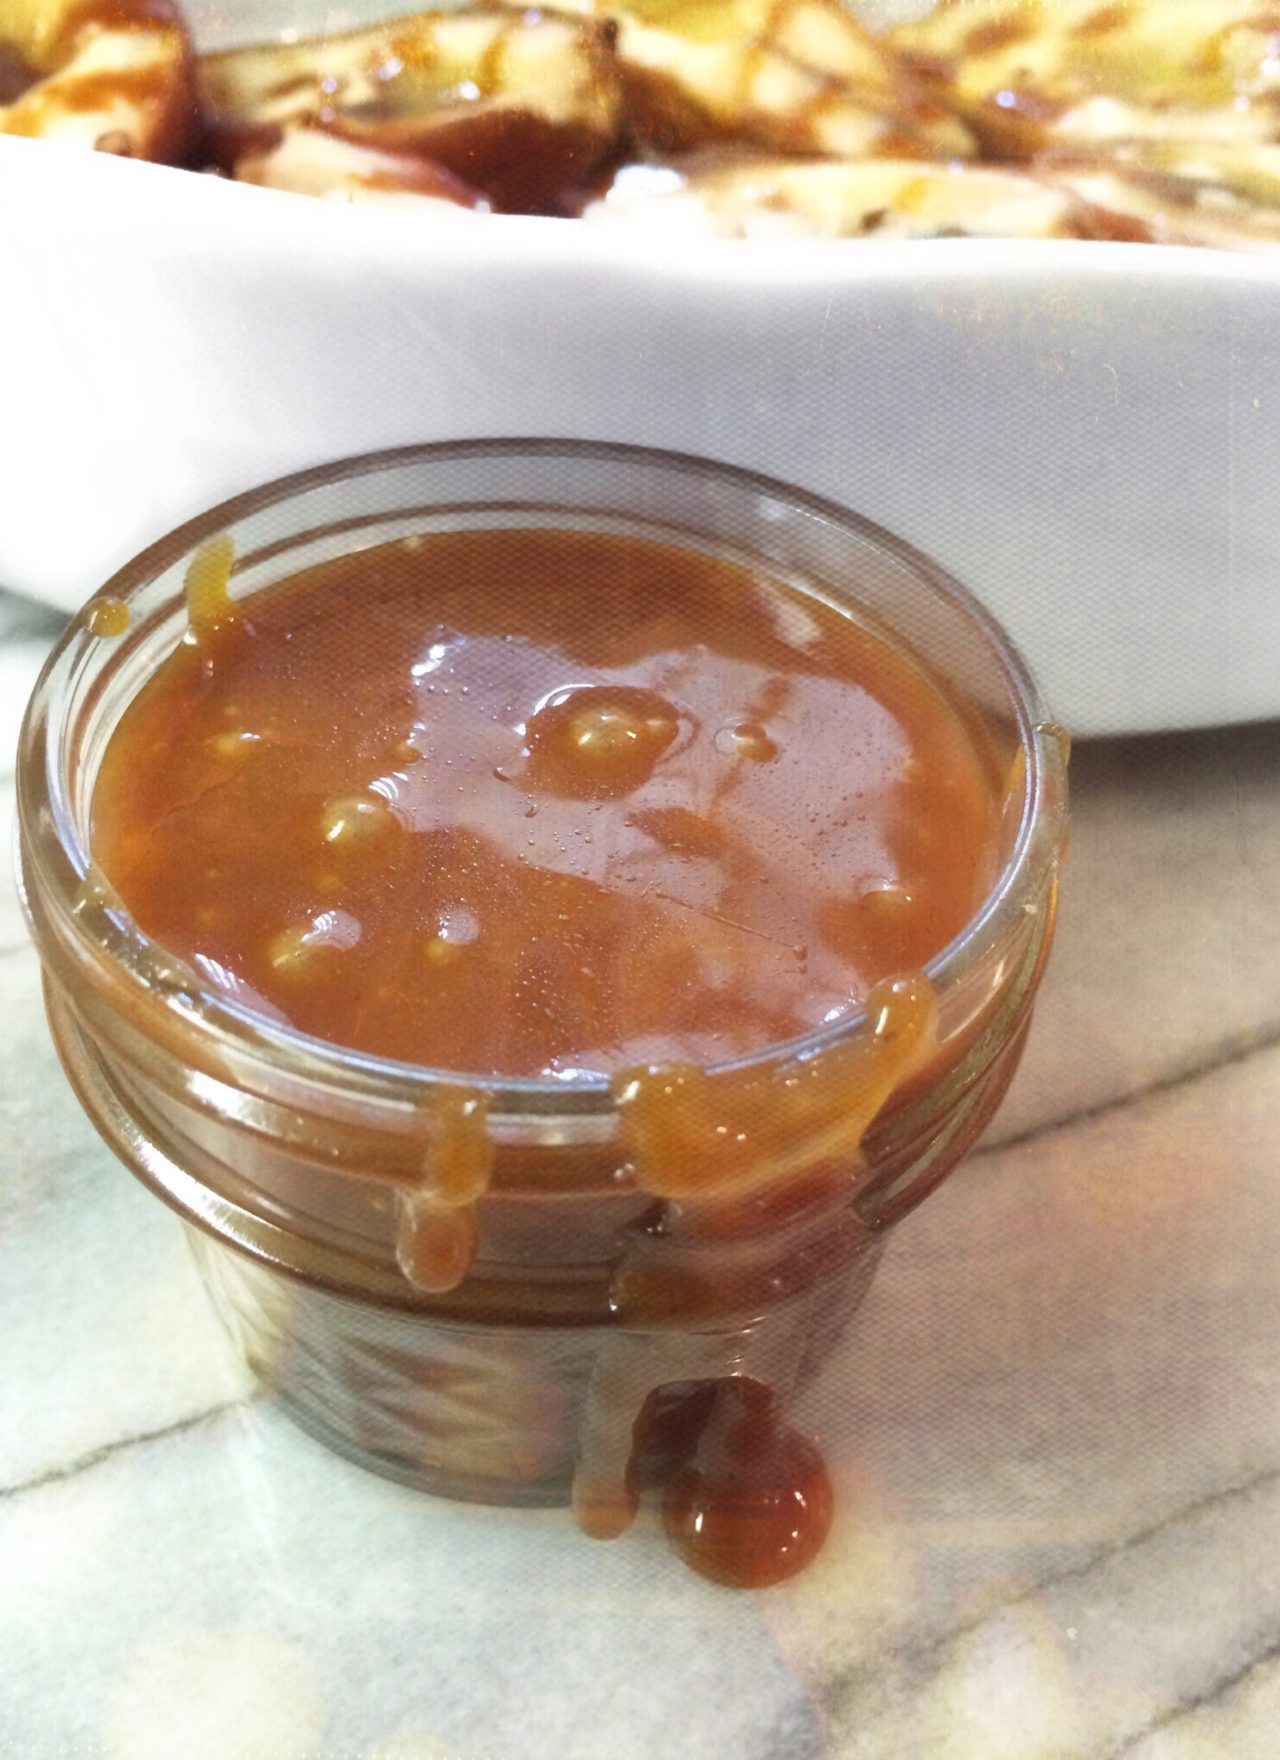 Paleo Caramel Sauce- Desserts, Coffees or by the Spoon